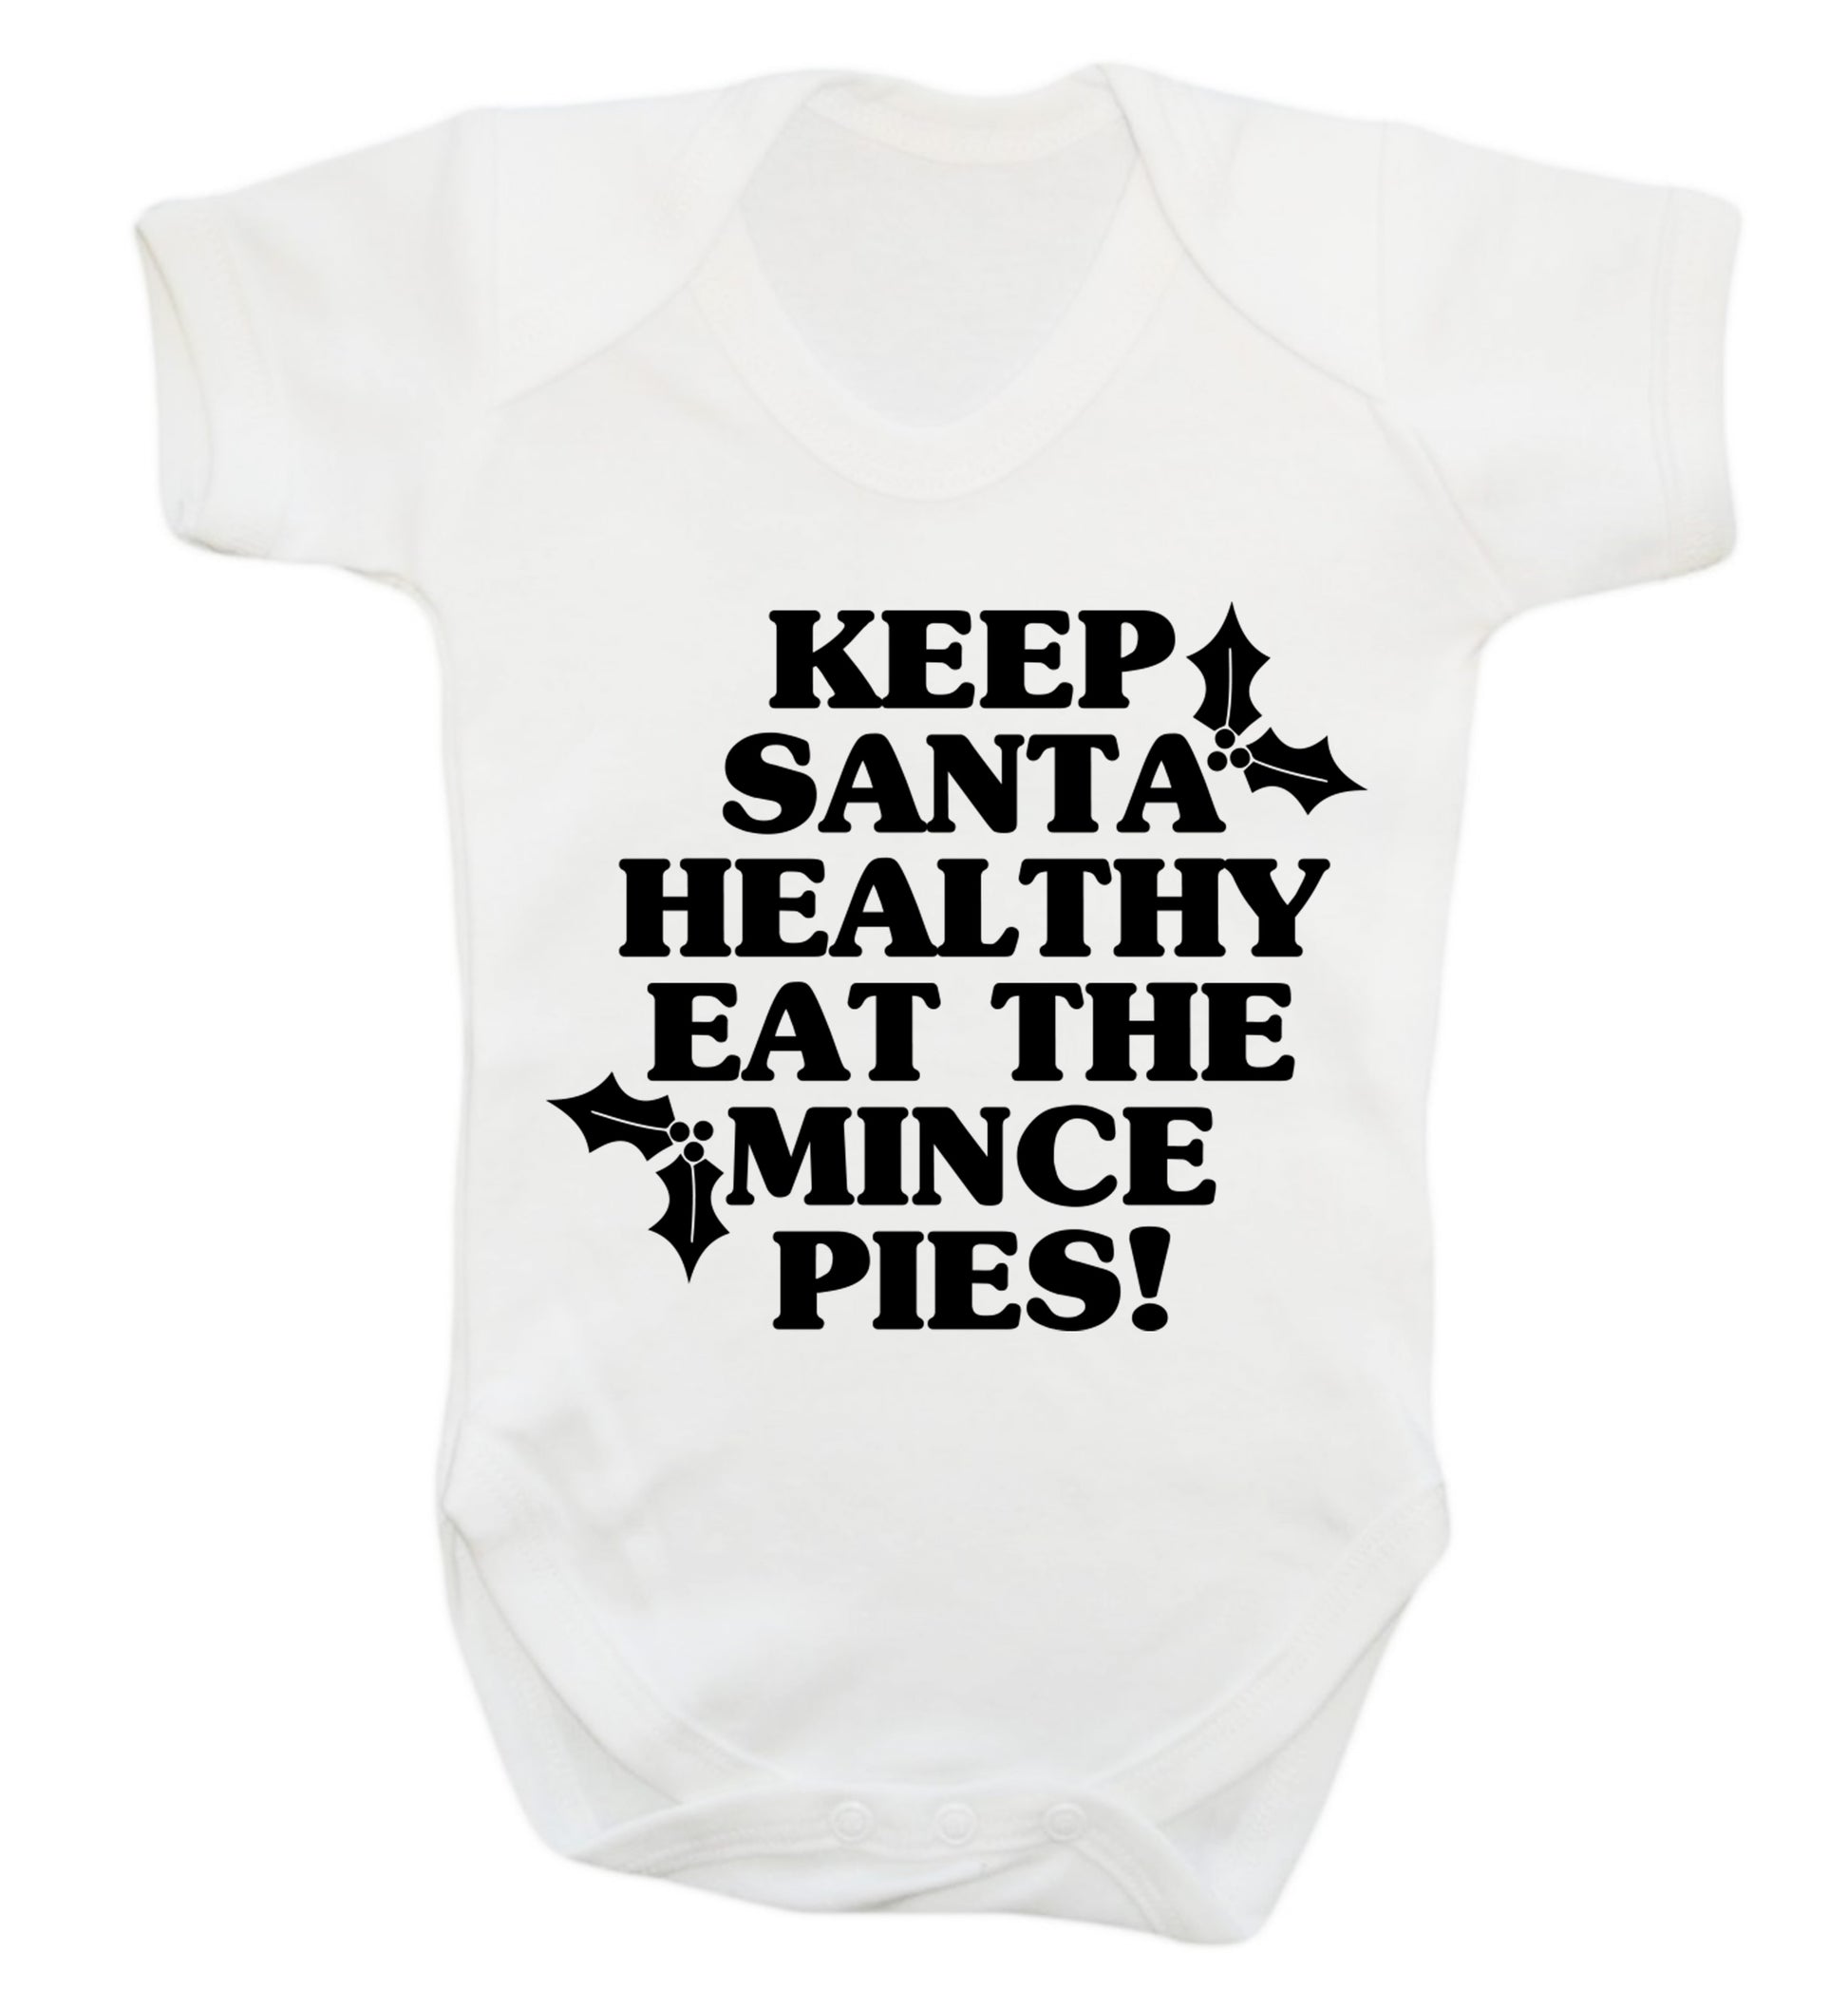 Keep santa healthy eat the mince pies Baby Vest white 18-24 months